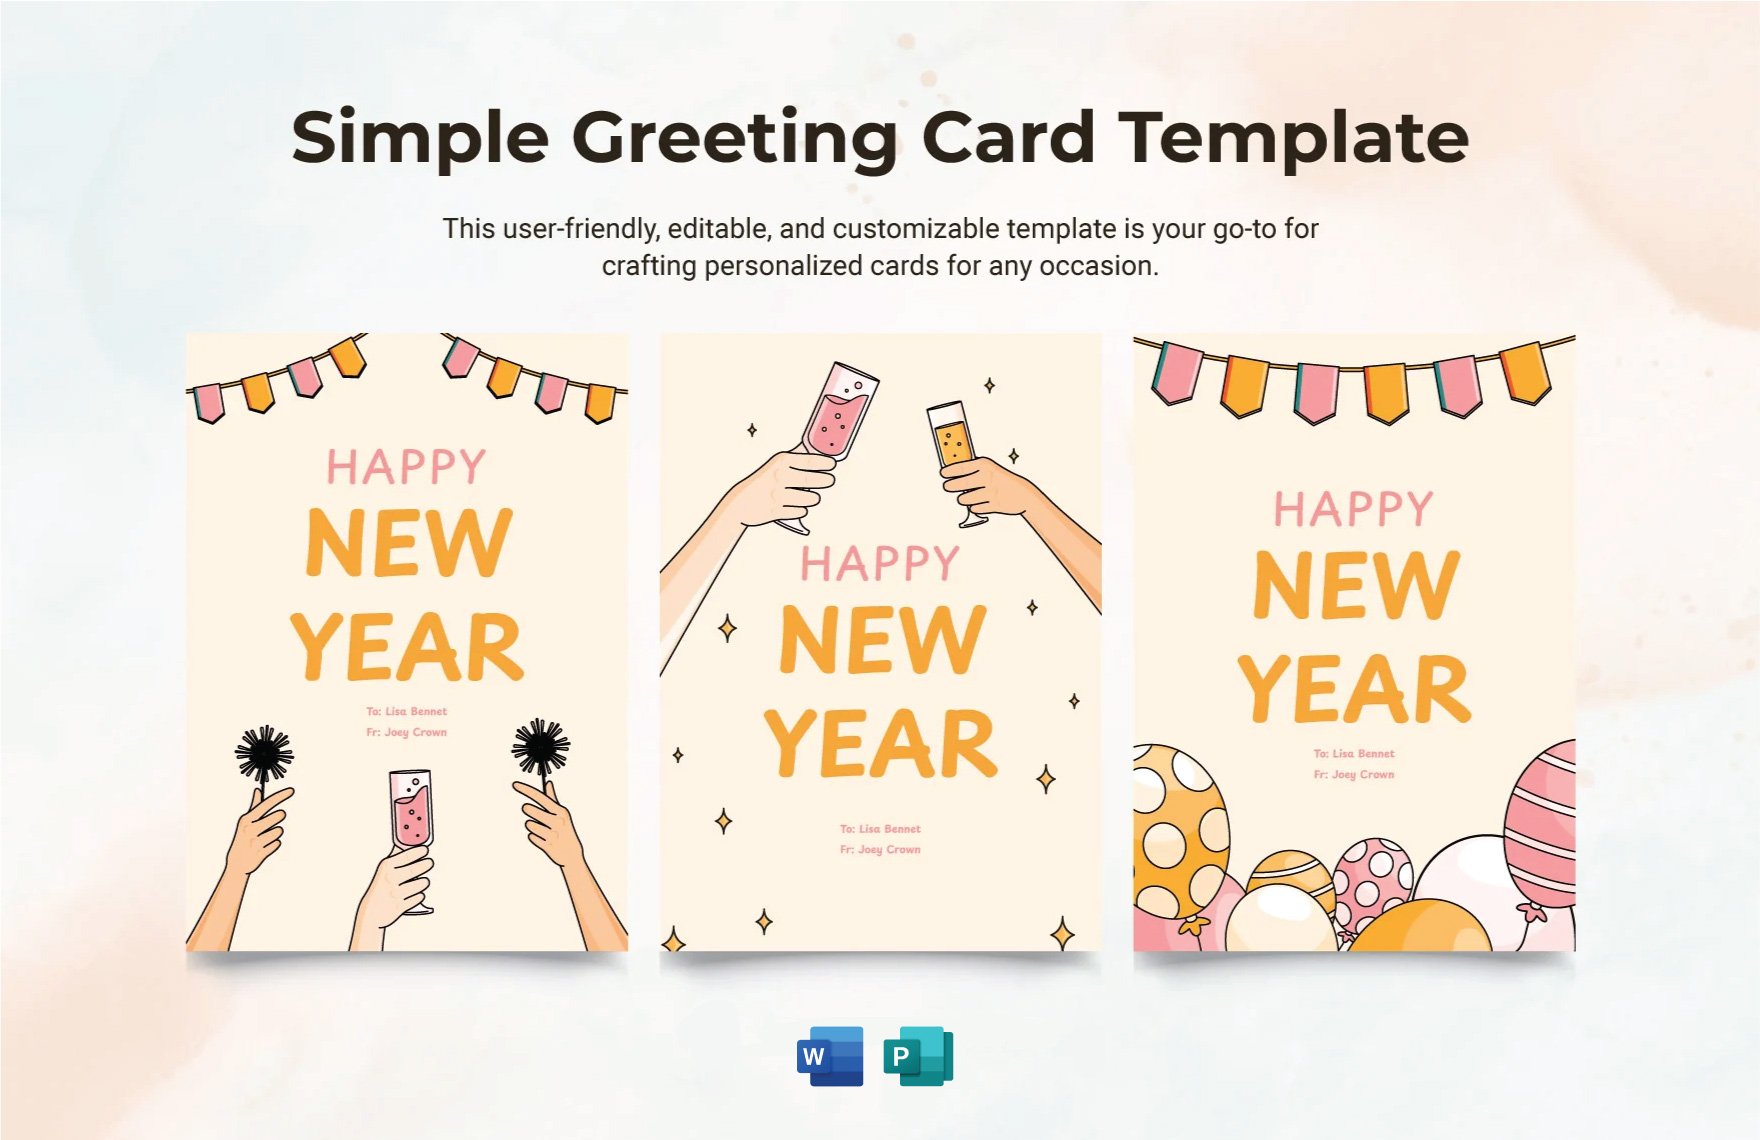 Simple Greeting Card Template